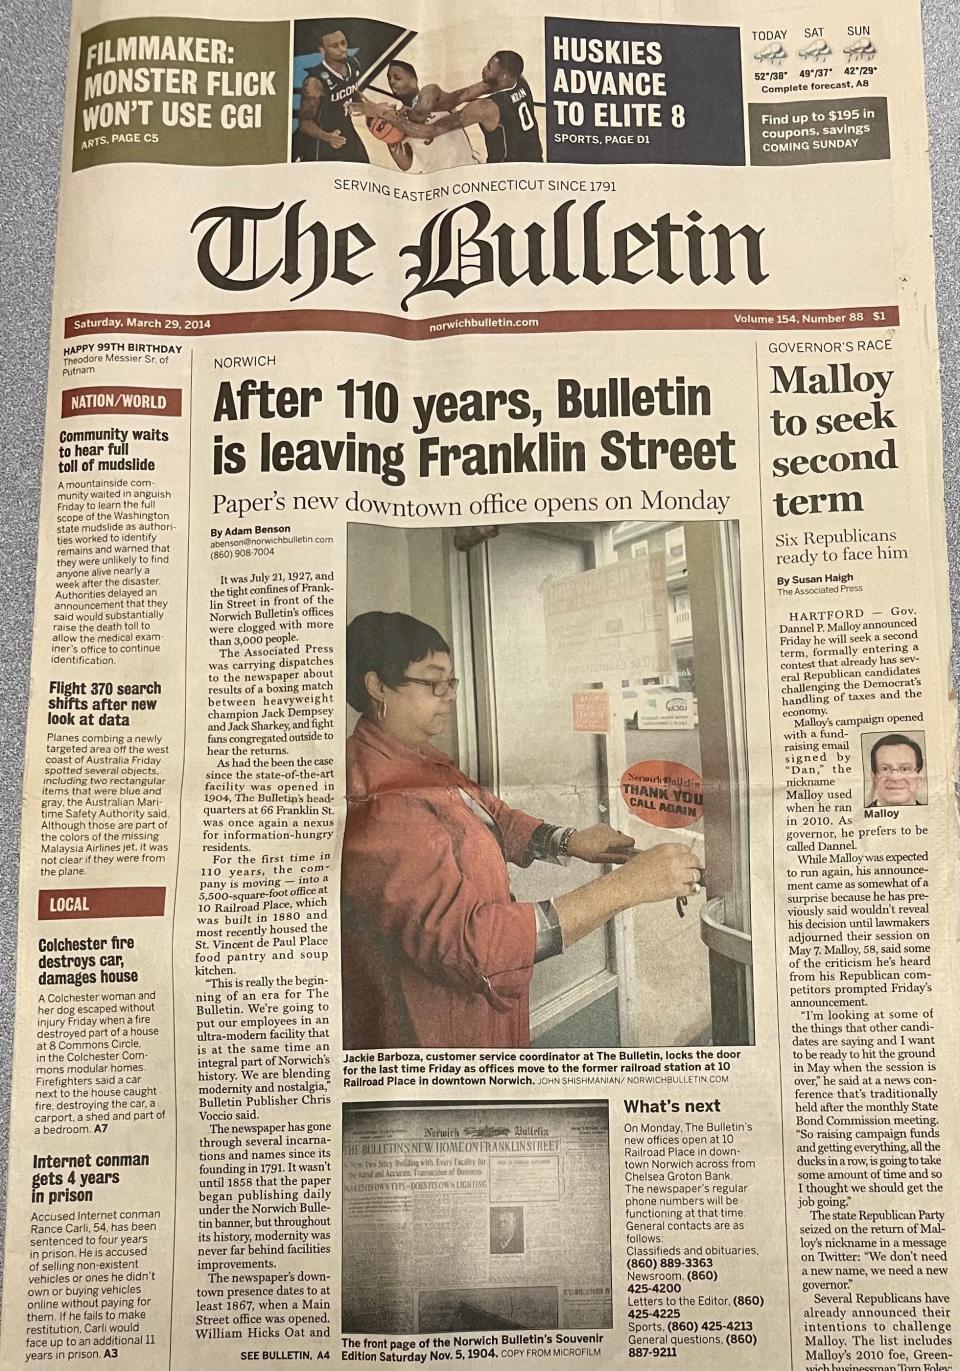 The front page that announced The Bulletin was leaving 66 Franklin St. in 2014.